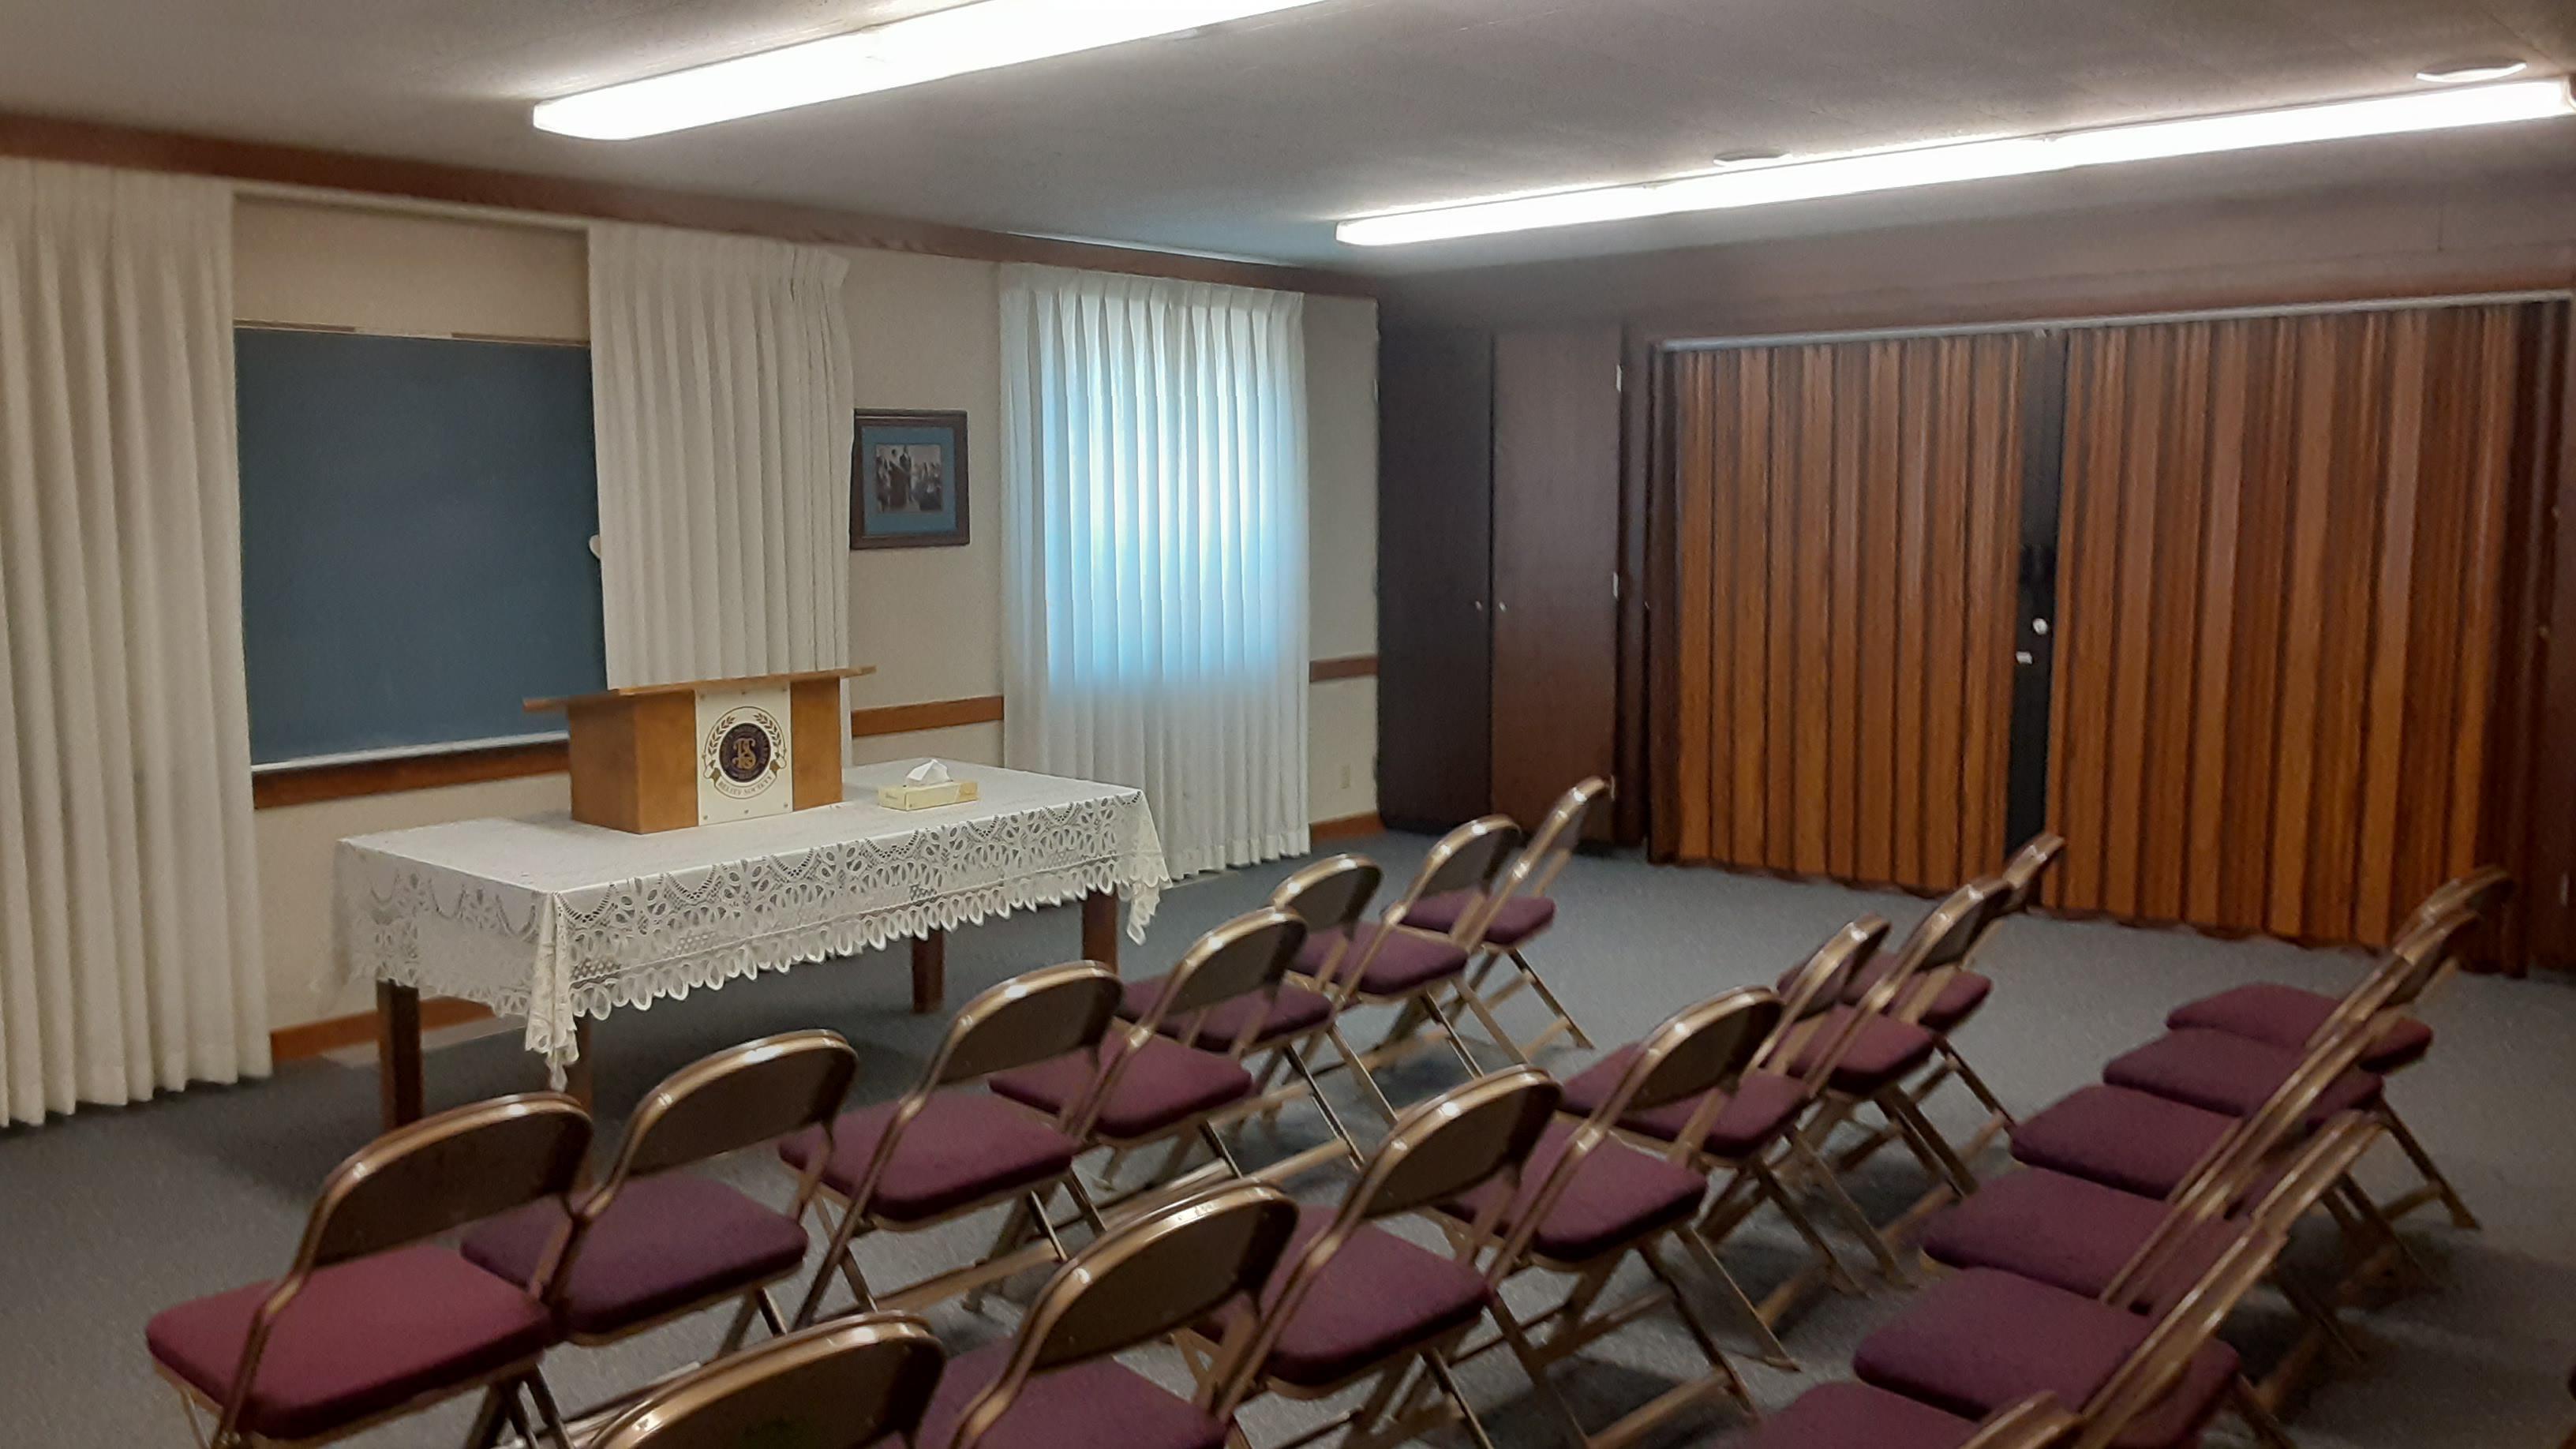 A classroom of the Hawthorne and Quinn Building of The Church of Jesus Christ of Latter-day Saints located at 4010 Hawthorne Road in Pocatello, Idaho.